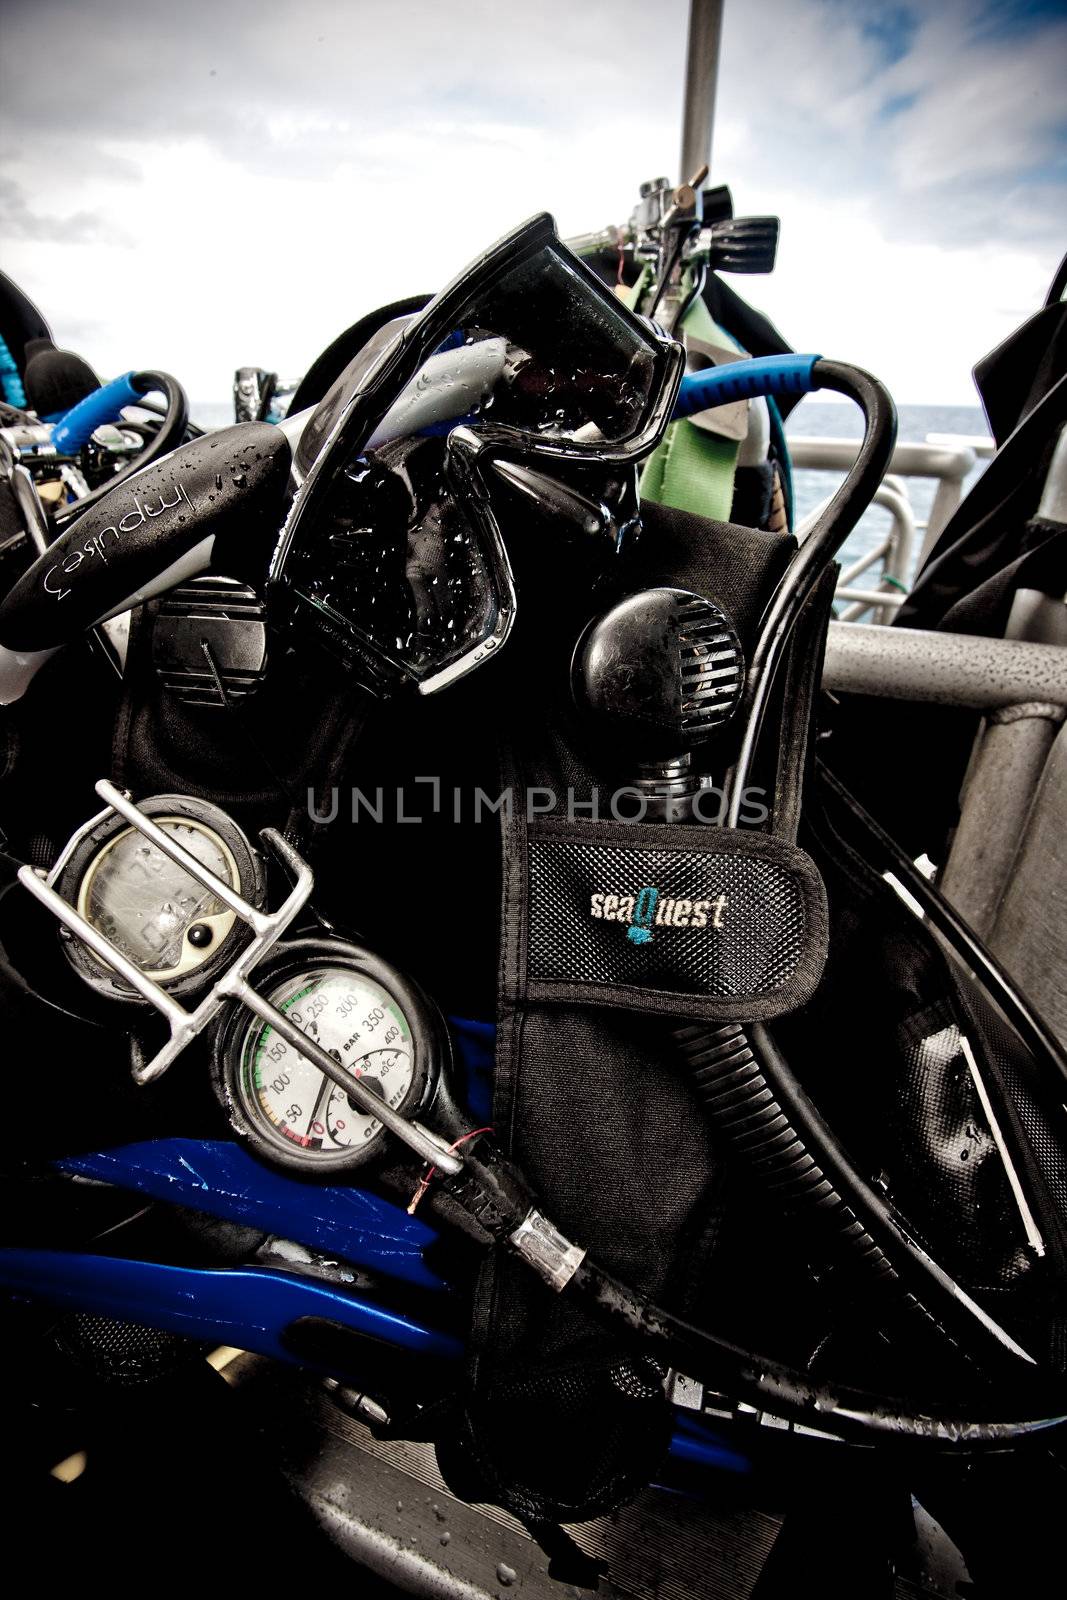 Scuba Equipment Used for Dives. 